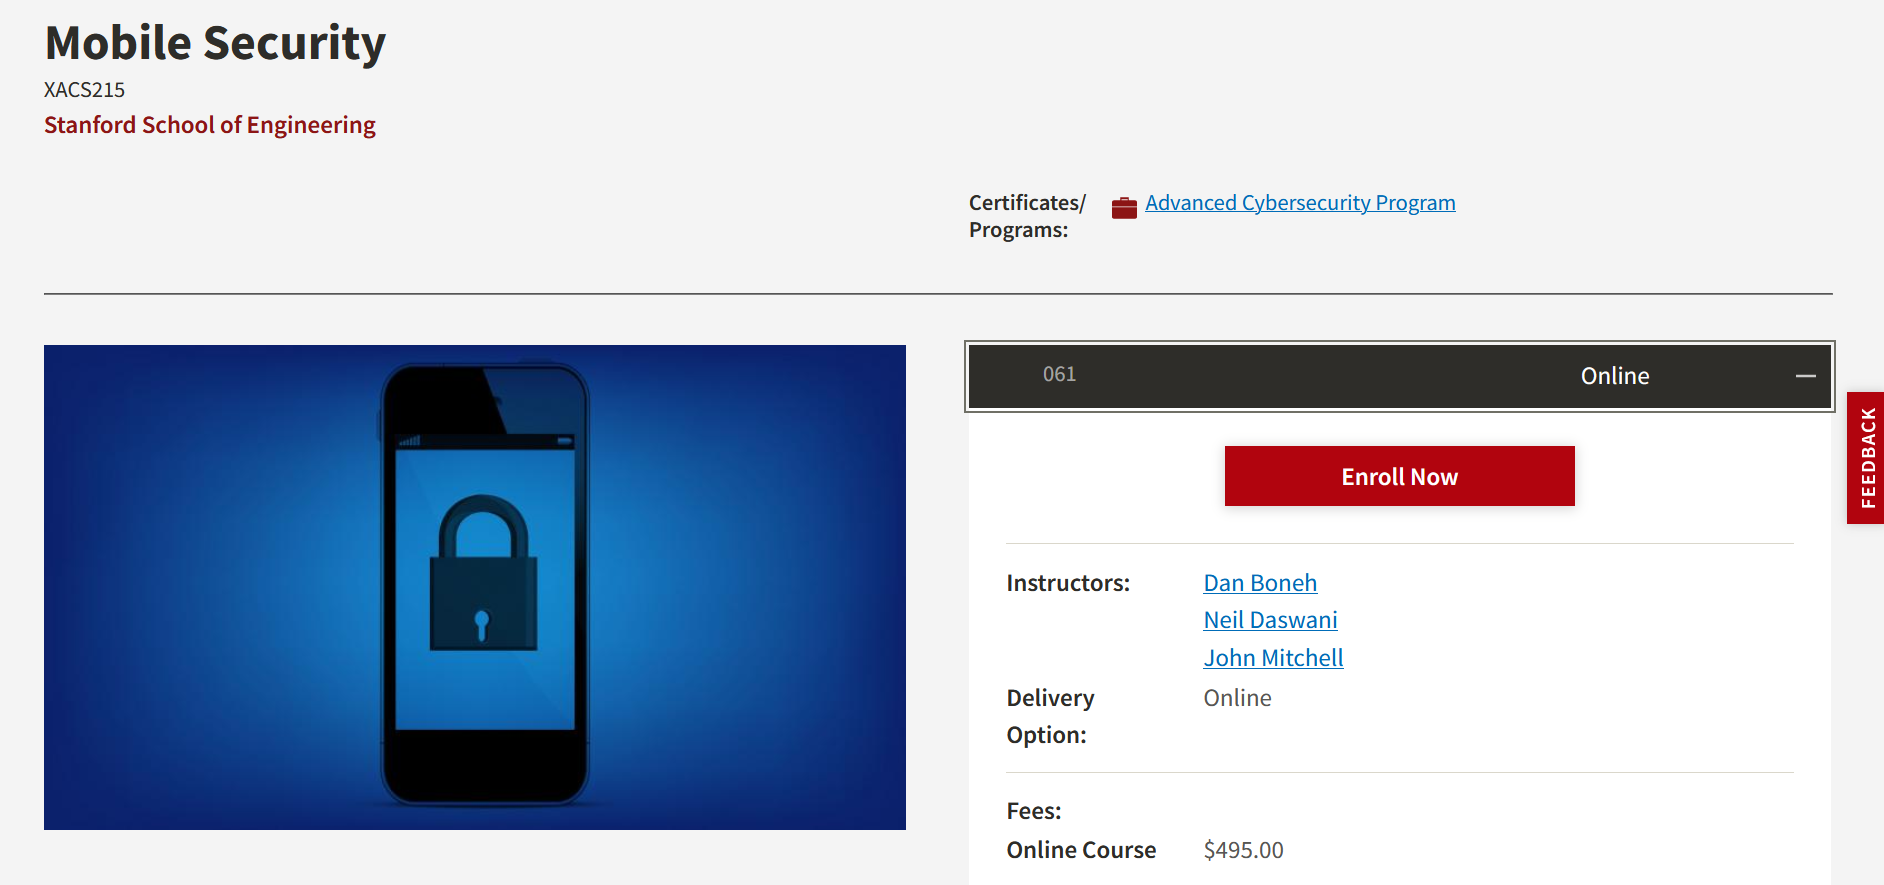 Stanford Online Mobile Security Course